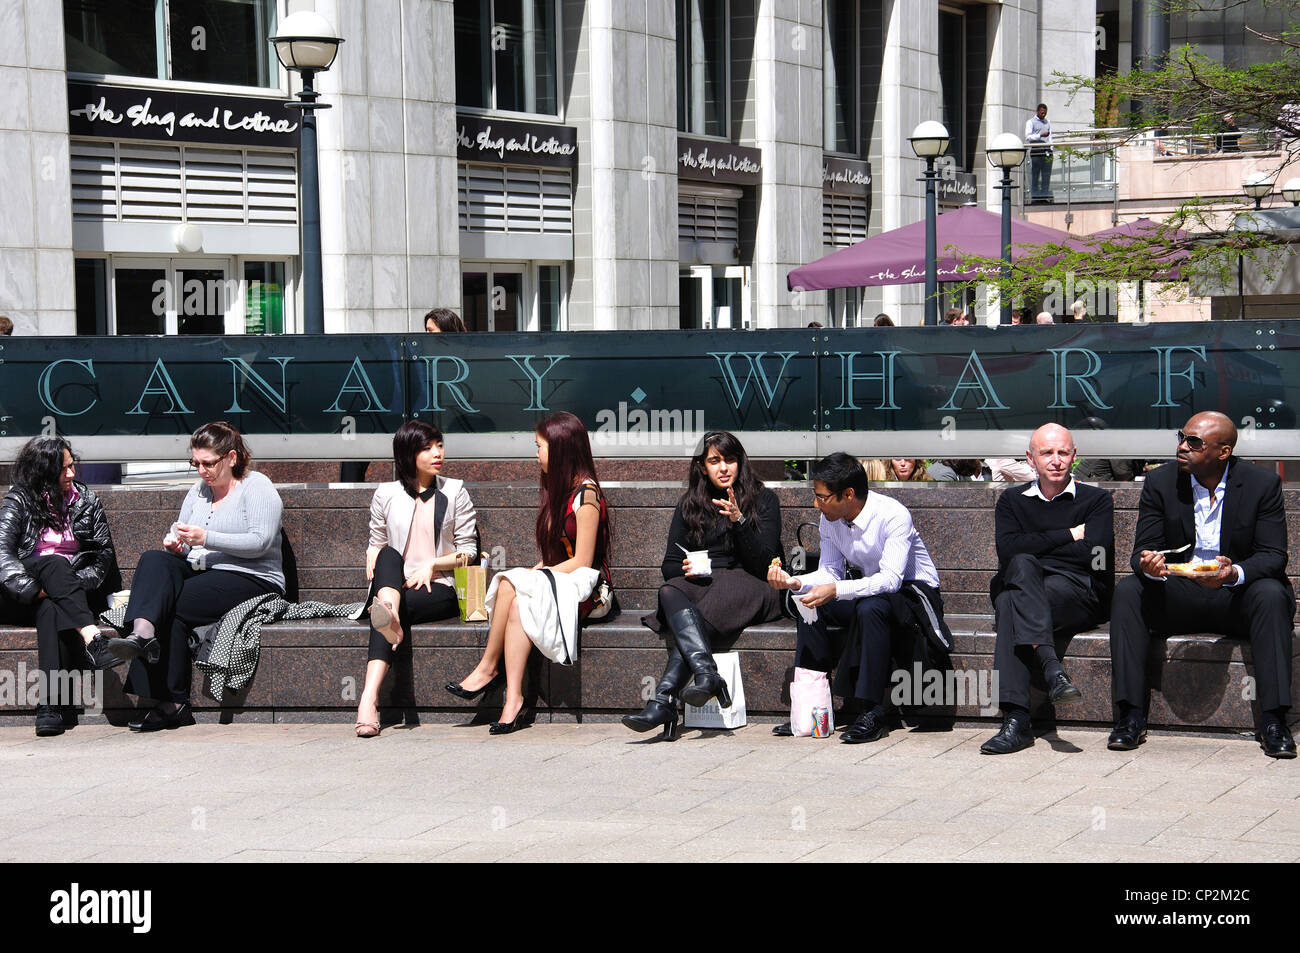 Workers at lunchtime sitting in Reuters Plaza, Canary Wharf, London Borough of Tower Hamlets, London, England, United Kingdom Stock Photo